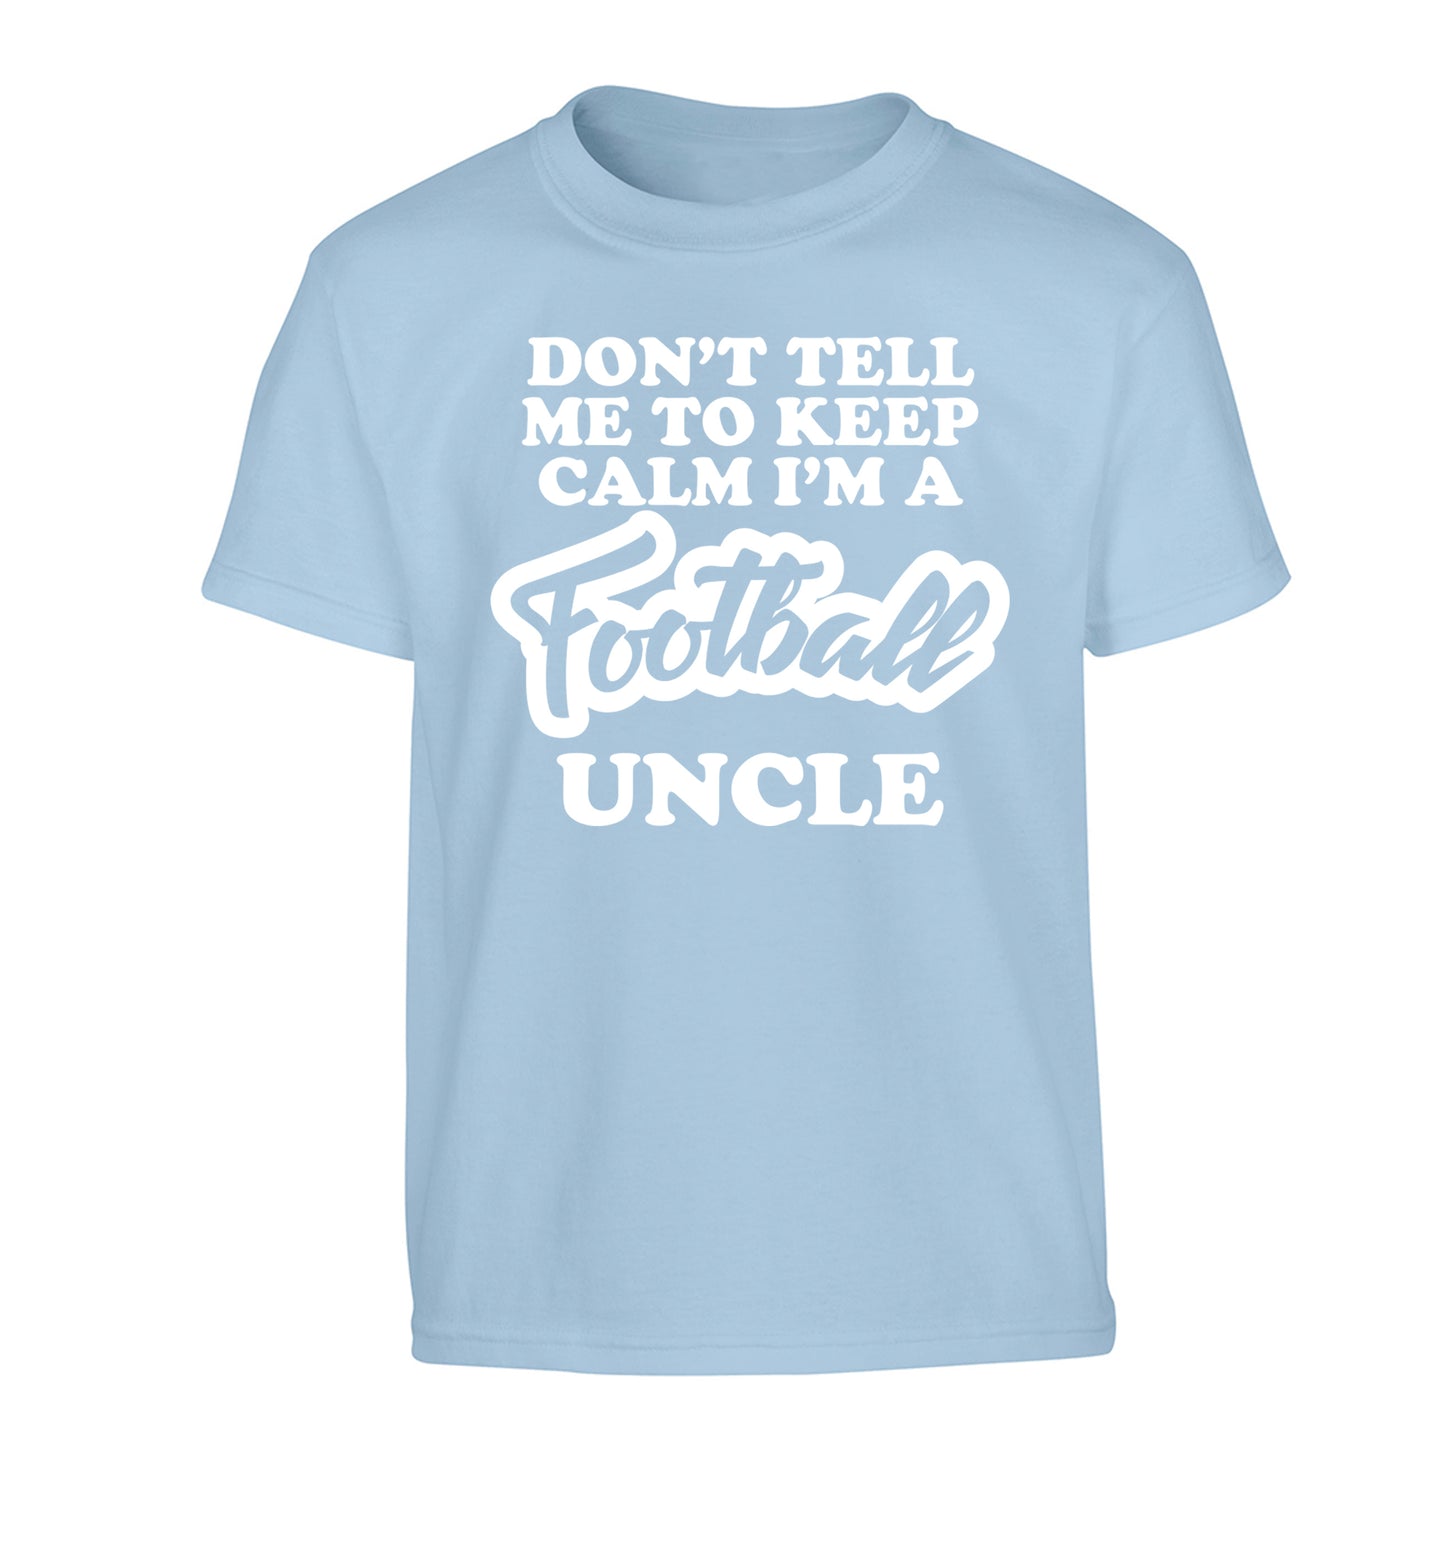 Don't tell me to keep calm I'm a football uncle Children's light blue Tshirt 12-14 Years